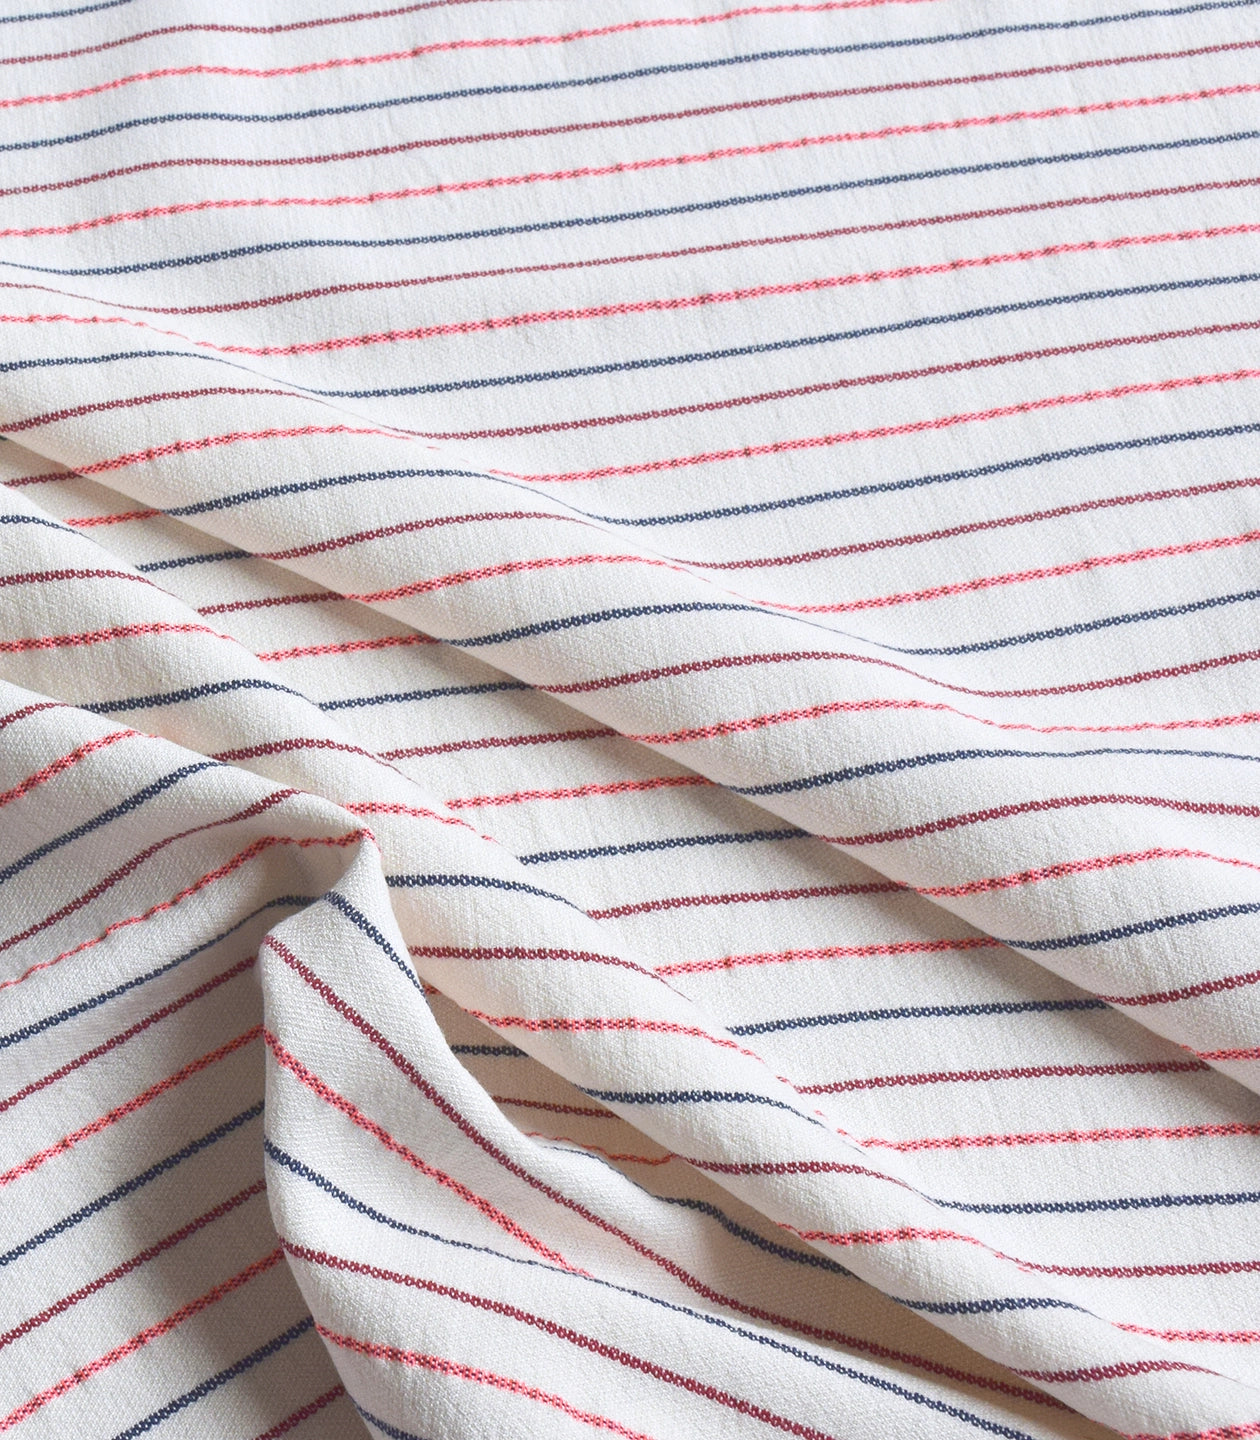 Cousette - Neon Pink Stripes Cotton Viscose Fabric